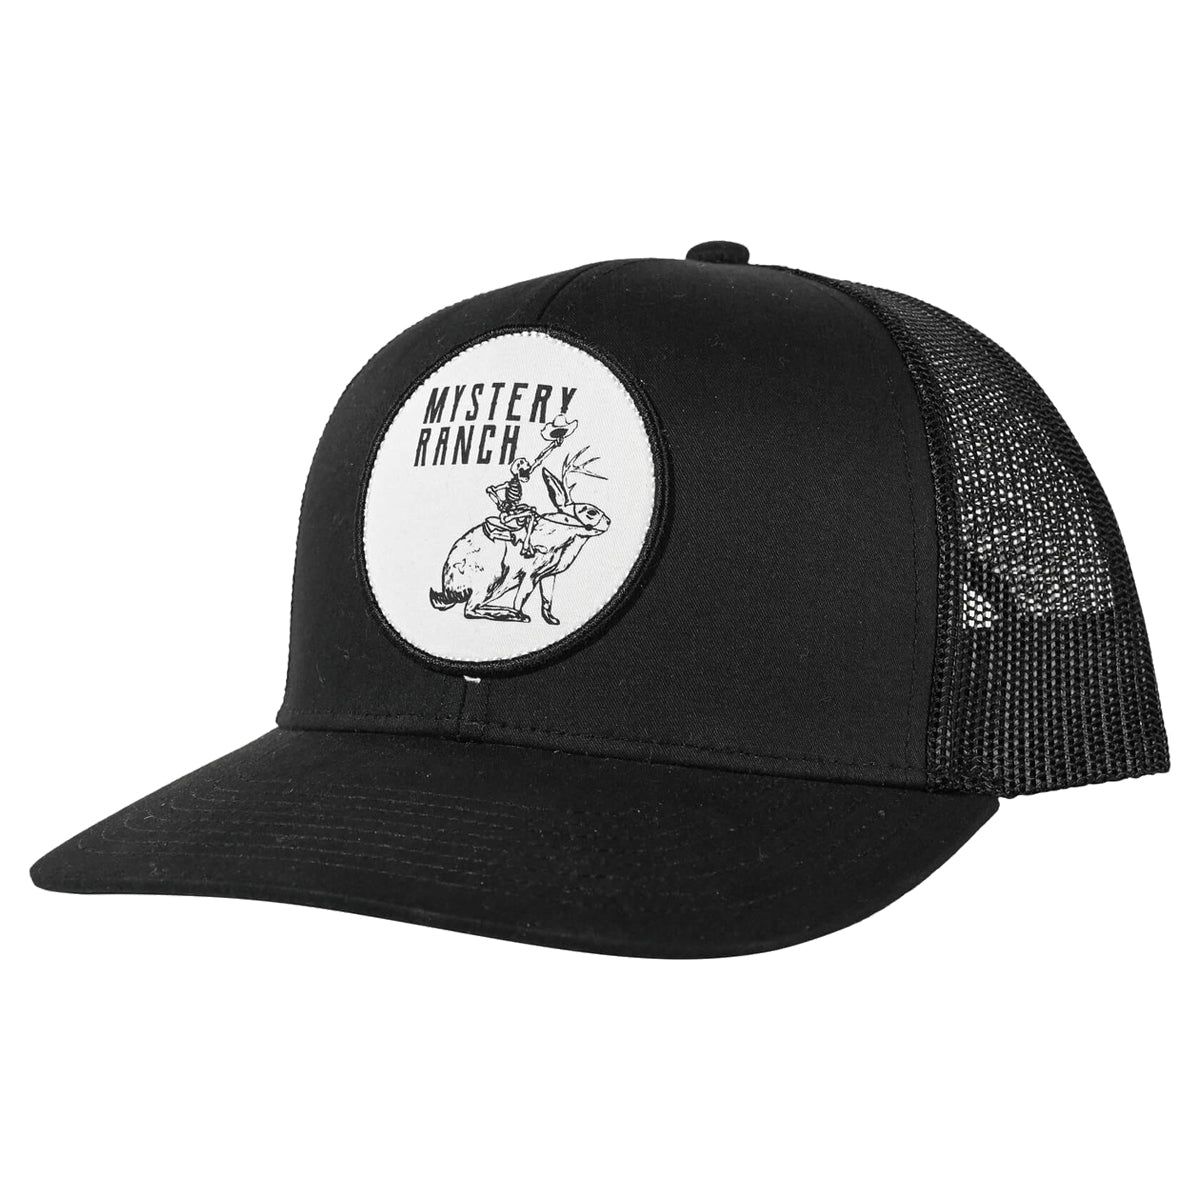 Mystery Ranch Ranch Rider Trucker Hat in Black by GOHUNT | Mystery Ranch - GOHUNT Shop